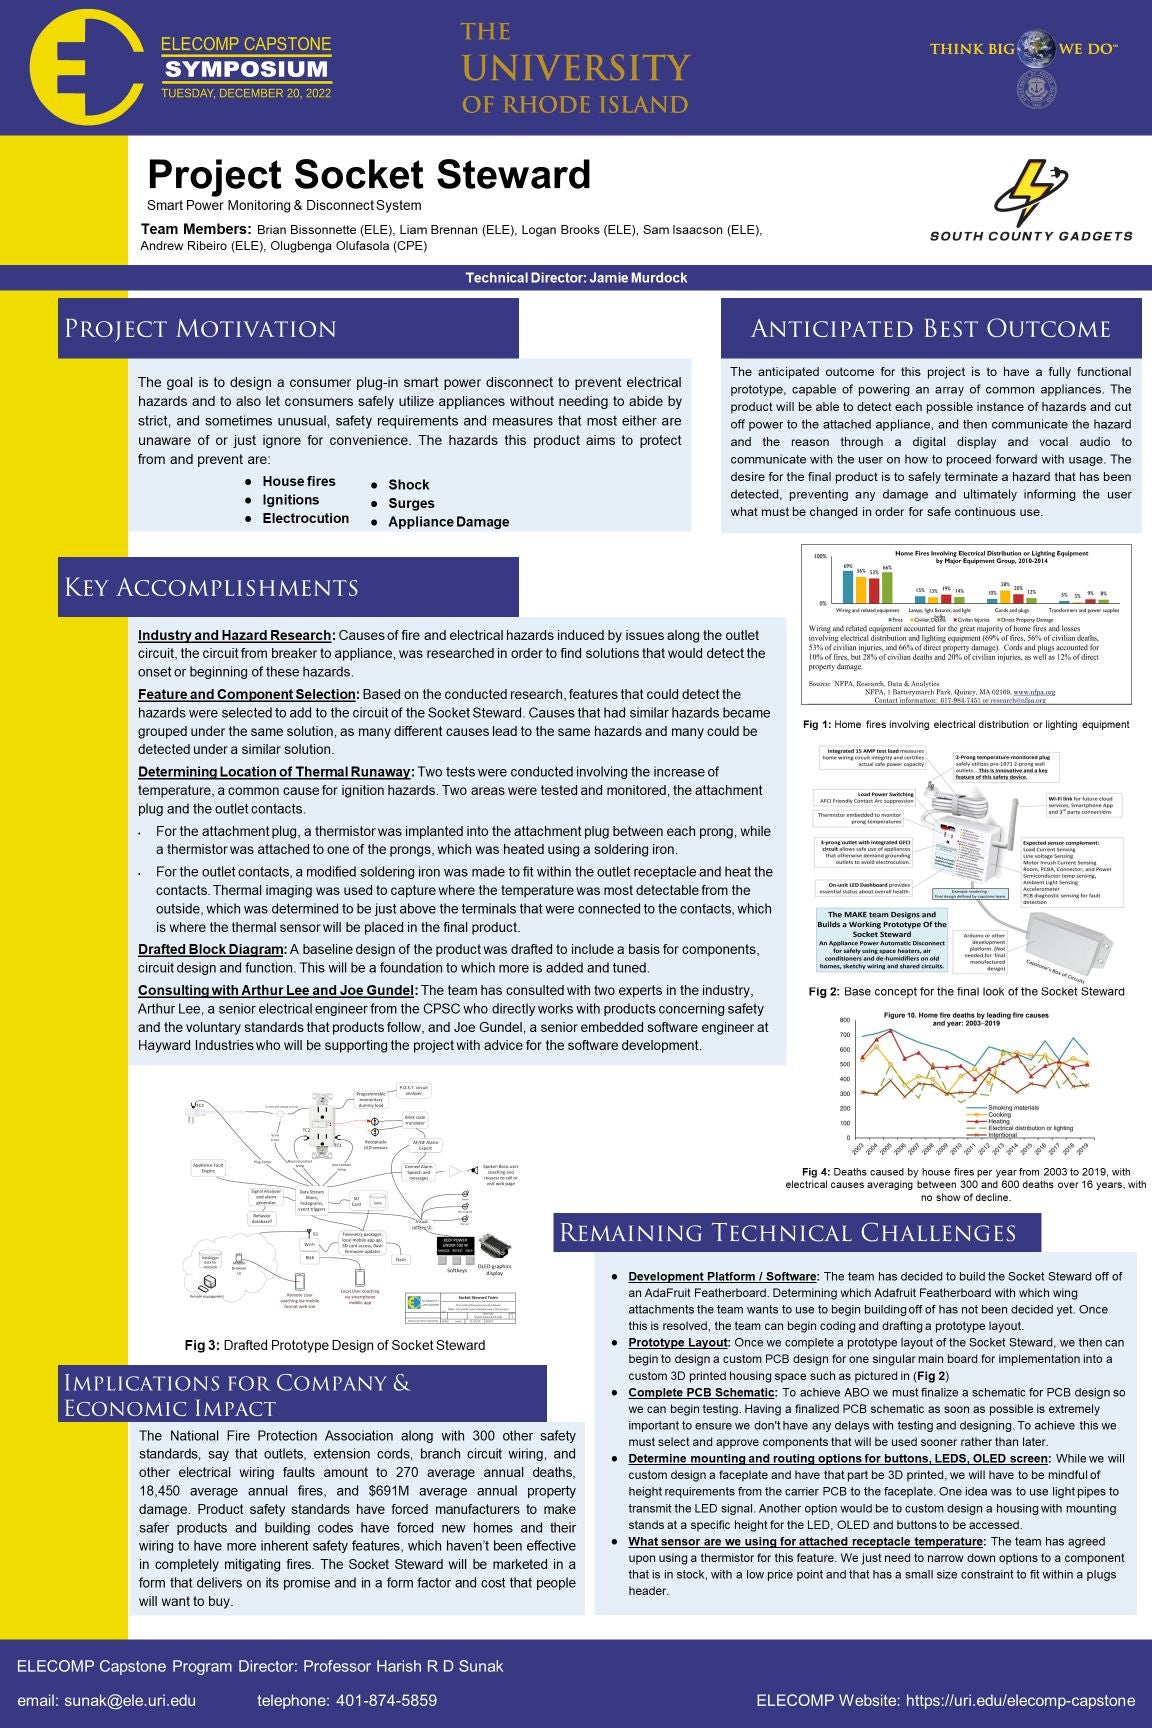 South-County-Gadgets-Symposium-Poster-2022-2023